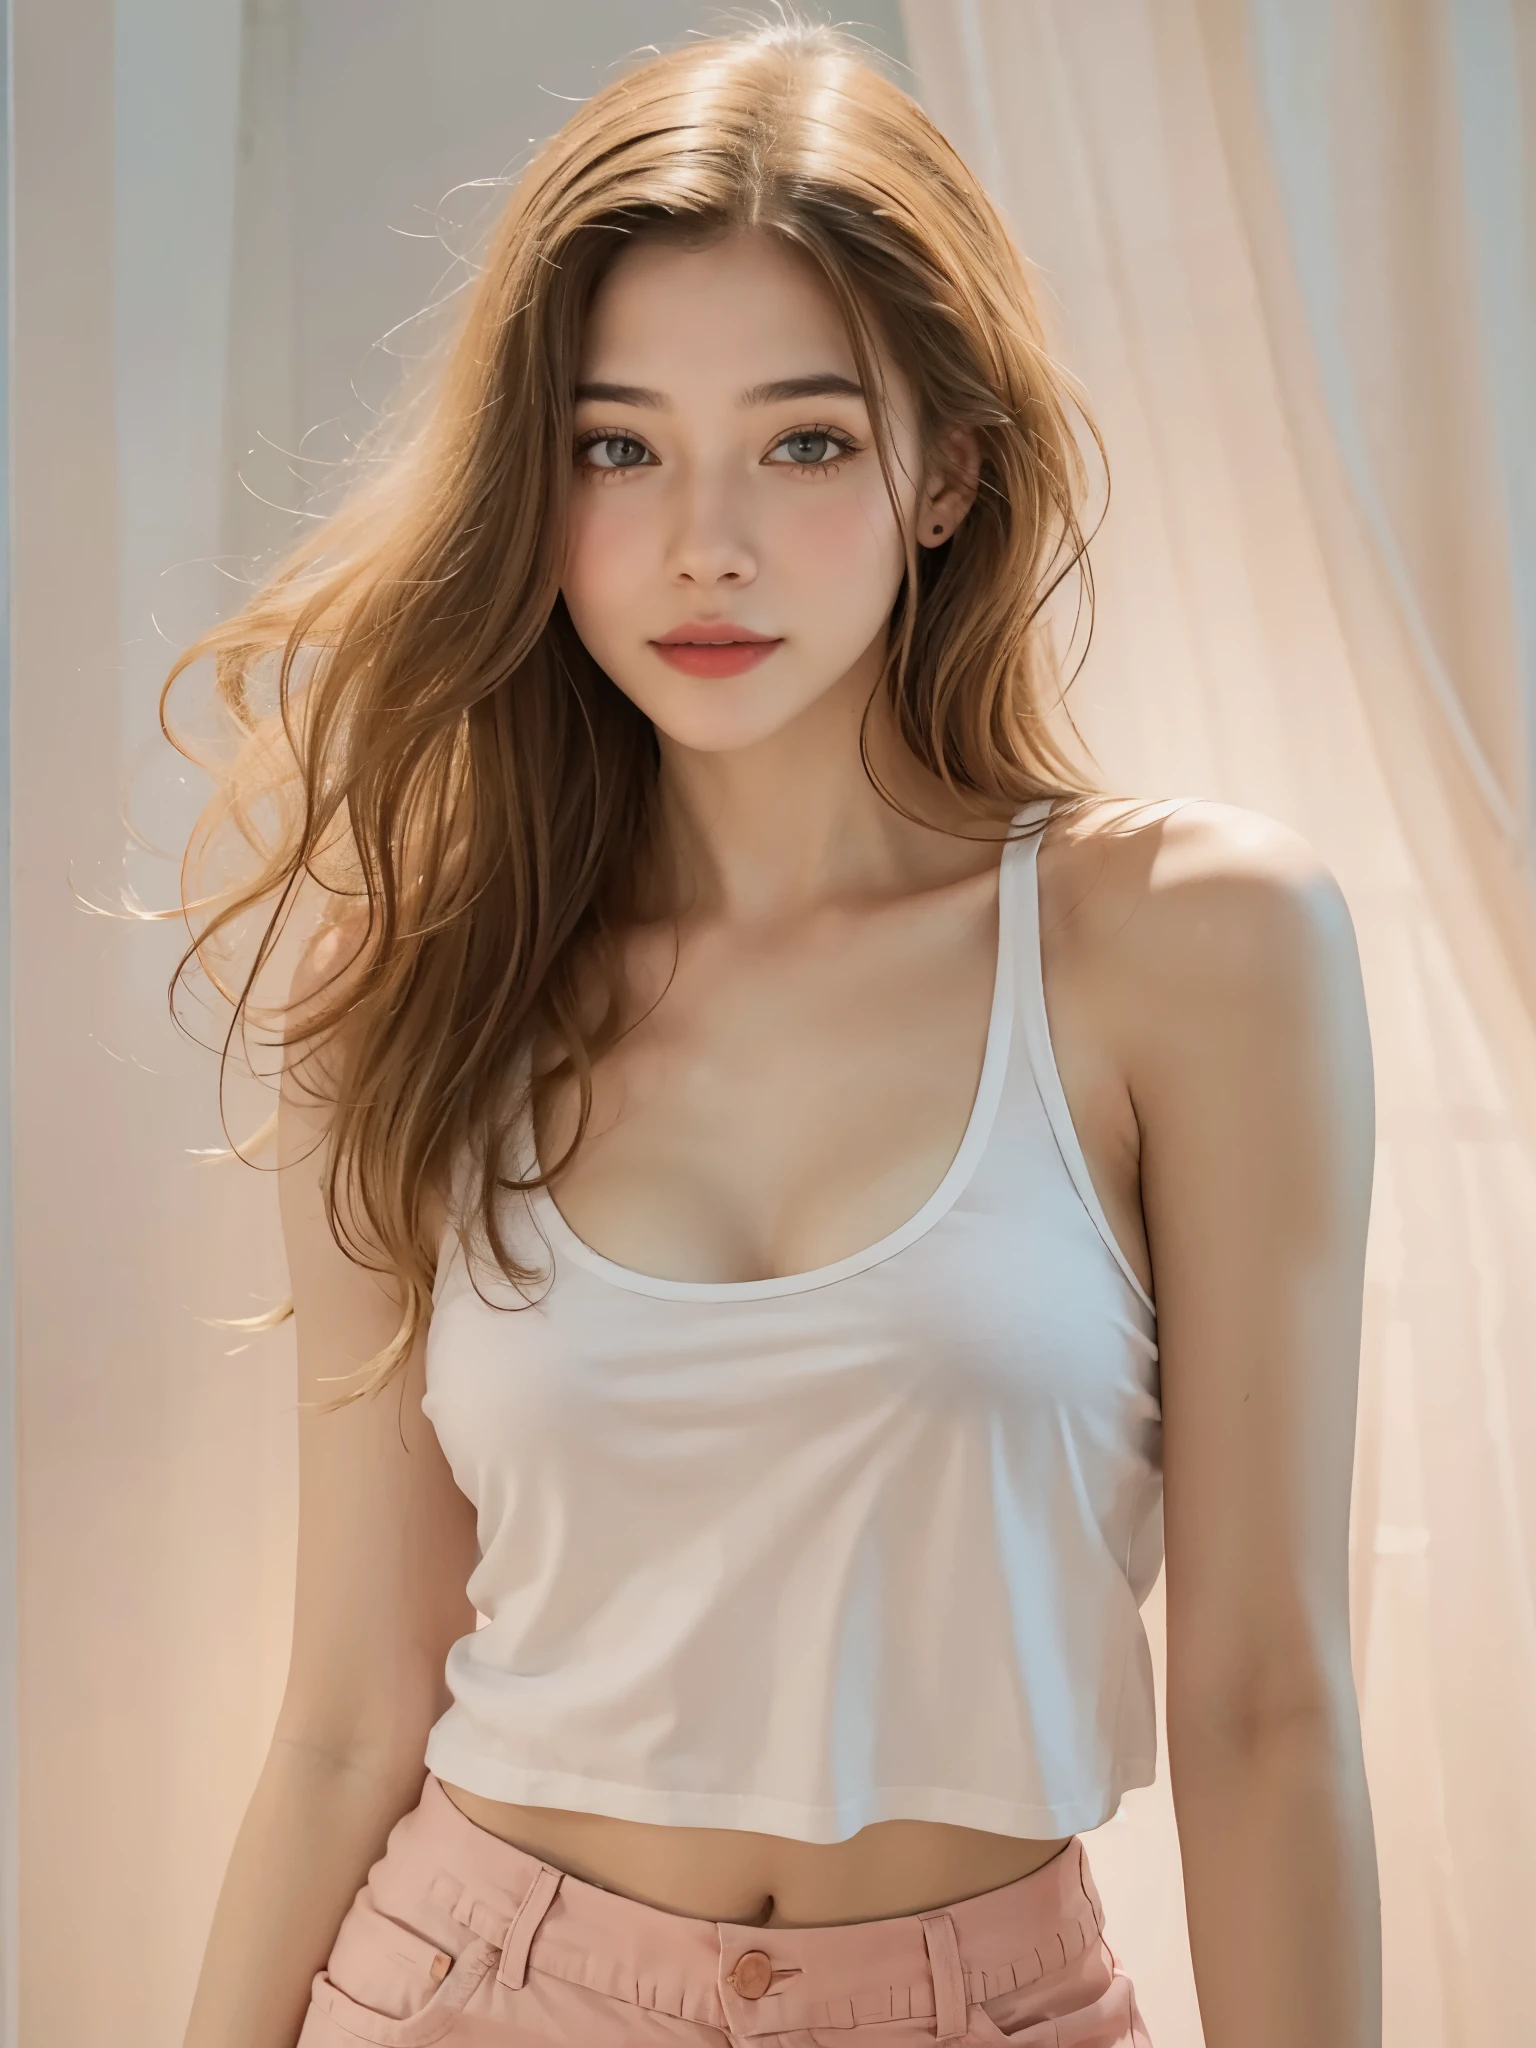 A half-Spanish and half-Japanese girl wearing a white shirt